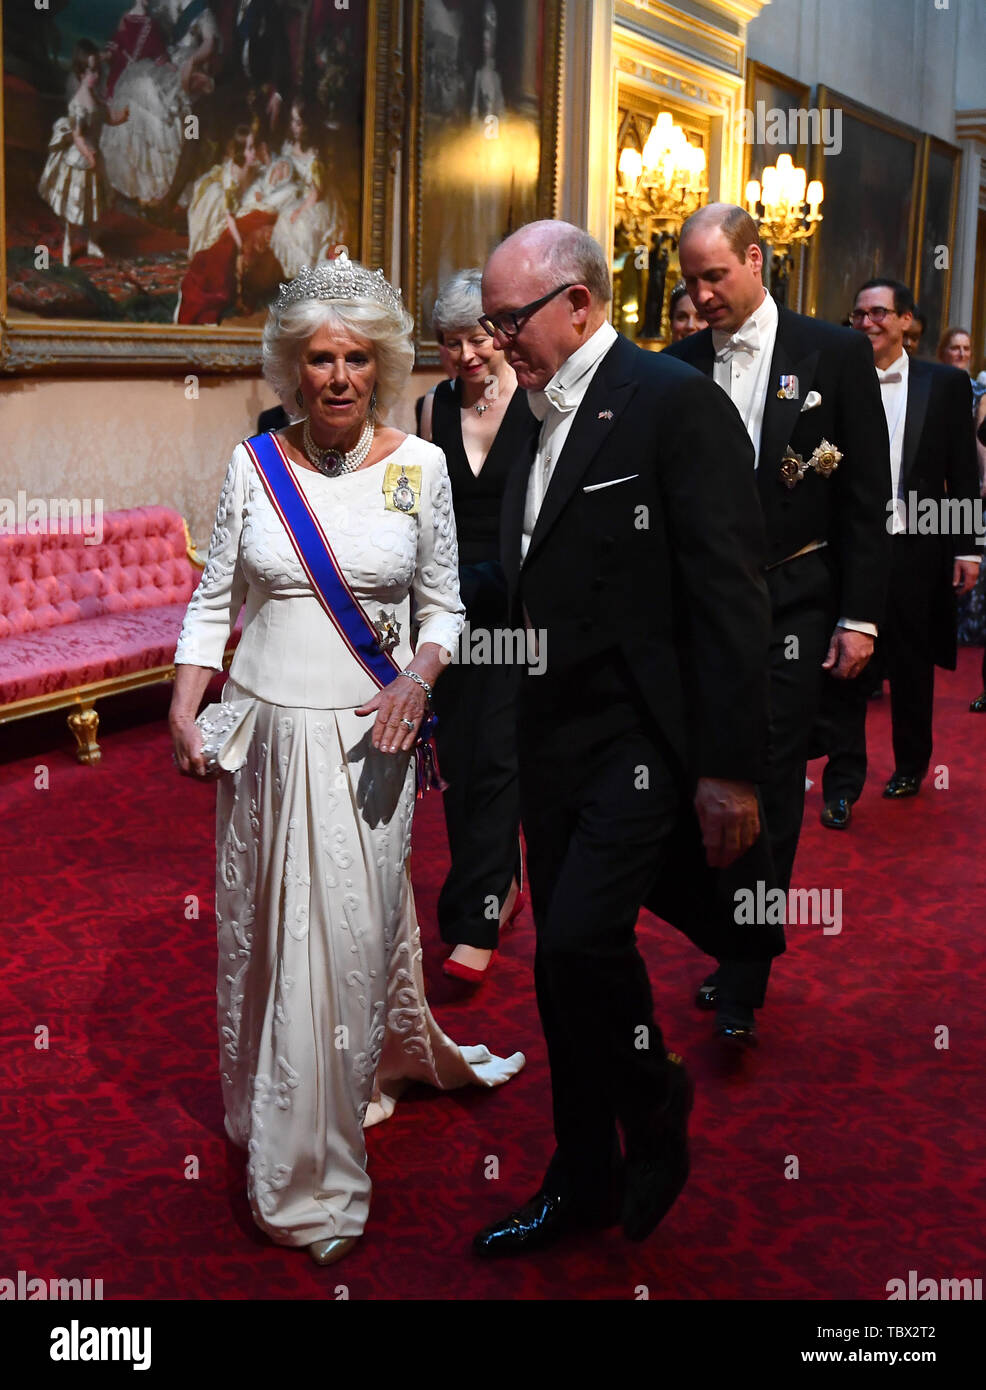 Duchess of Cornwall and Robert Wood Johnson, the United States Ambassador to the United Kingdom, arrive through the East Gallery during the State Banquet at Buckingham Palace, London, on day one of the US President's three day state visit to the UK. Stock Photo